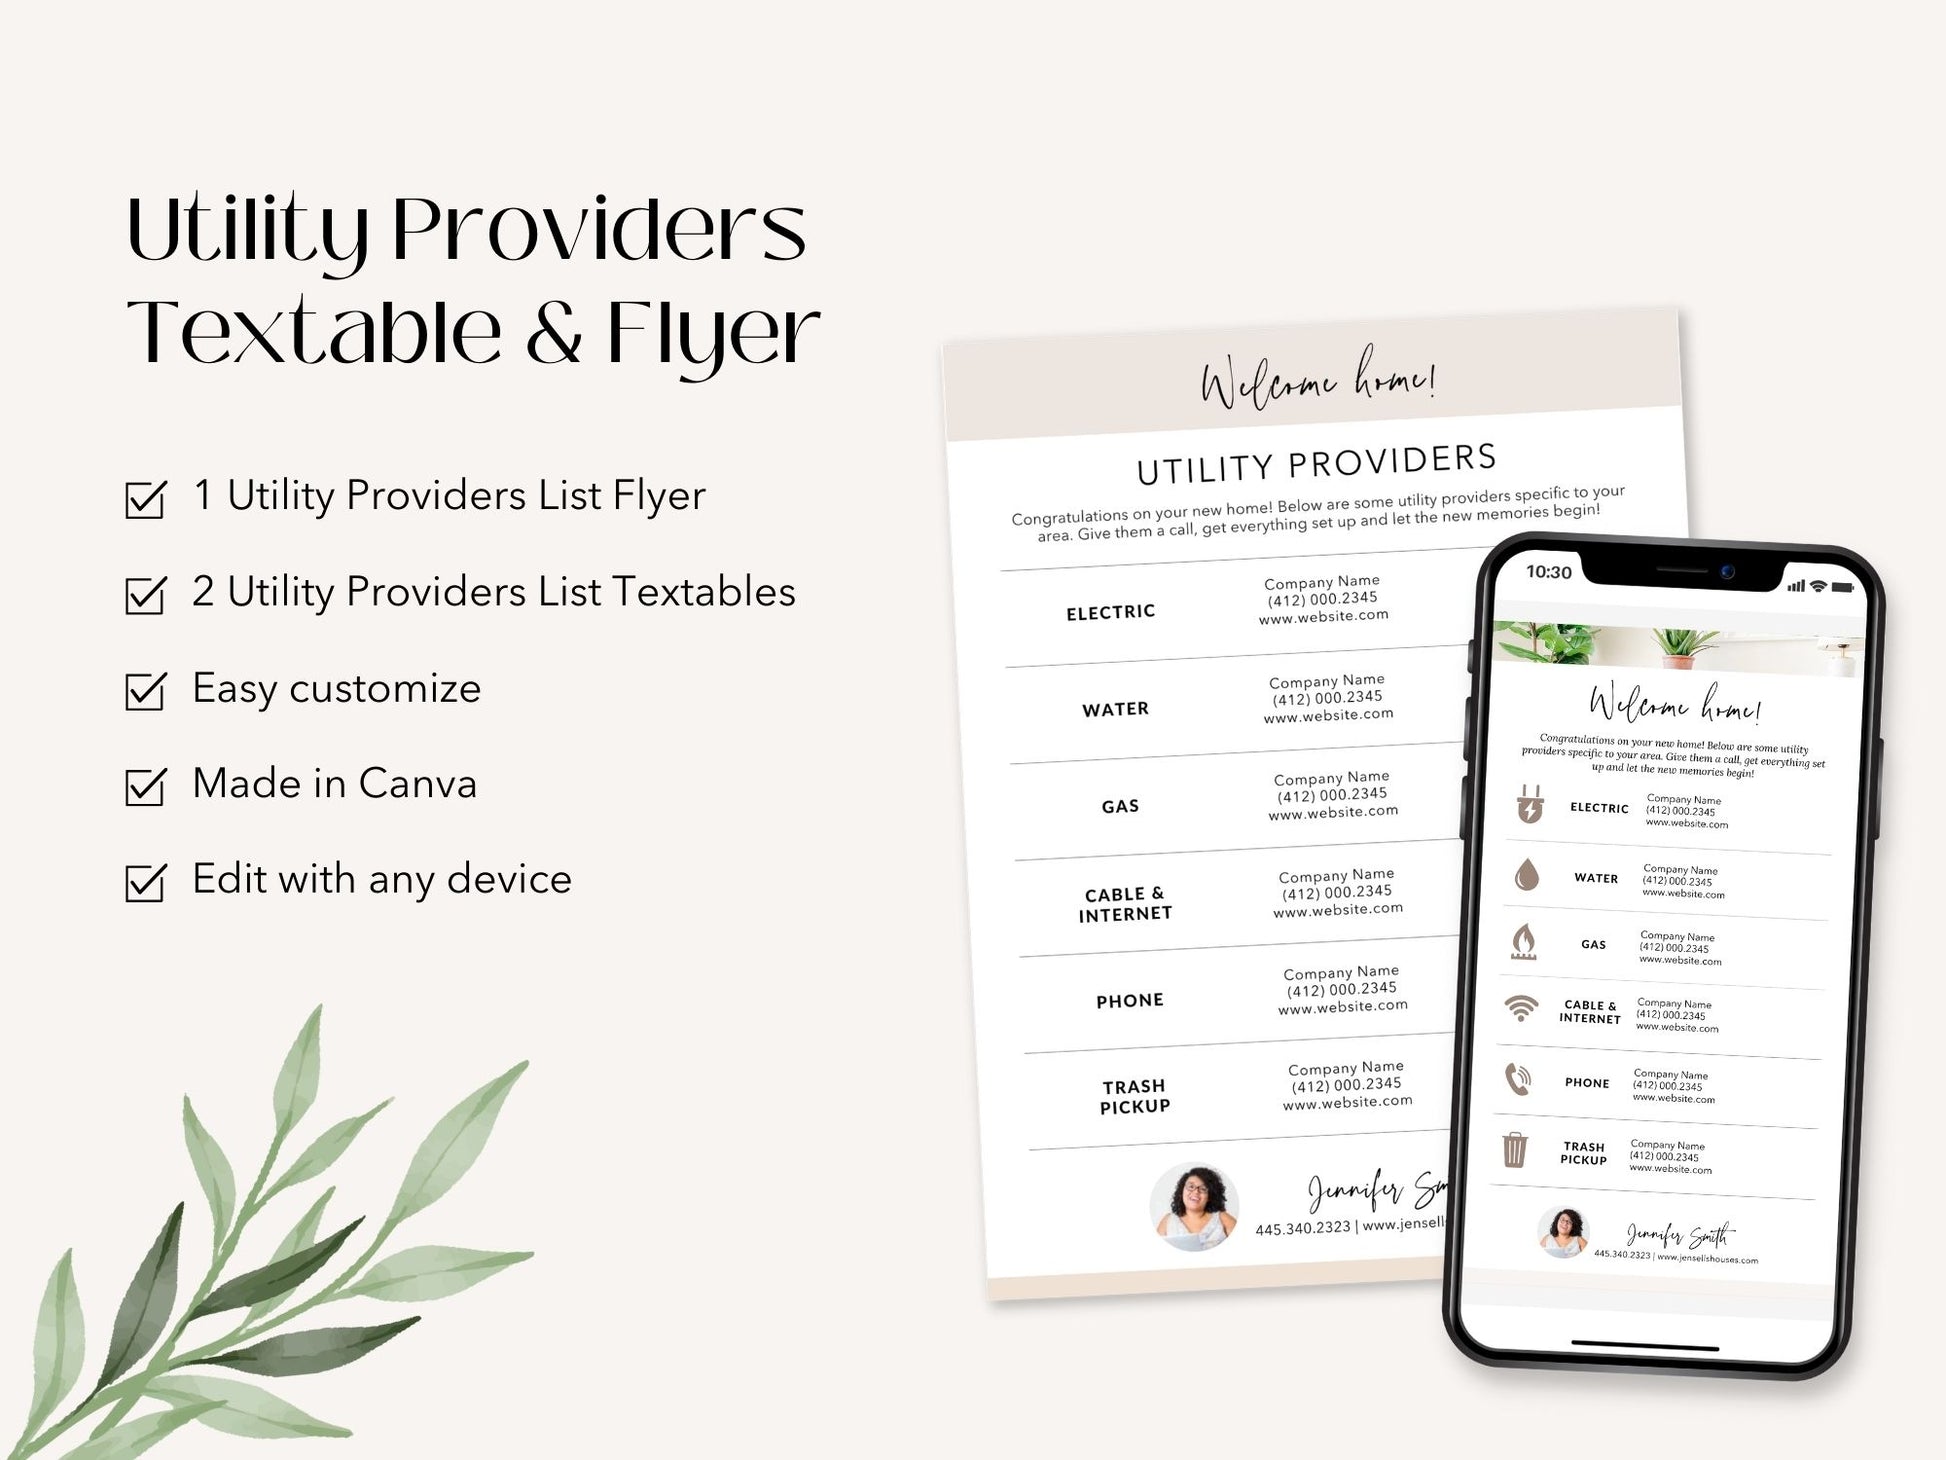 Utility Providers List Textable and Flyer Bundle - Simplify home transitions with an informative Utility Providers Flyer and a practical Textable Utility Providers guide for managing essential services seamlessly